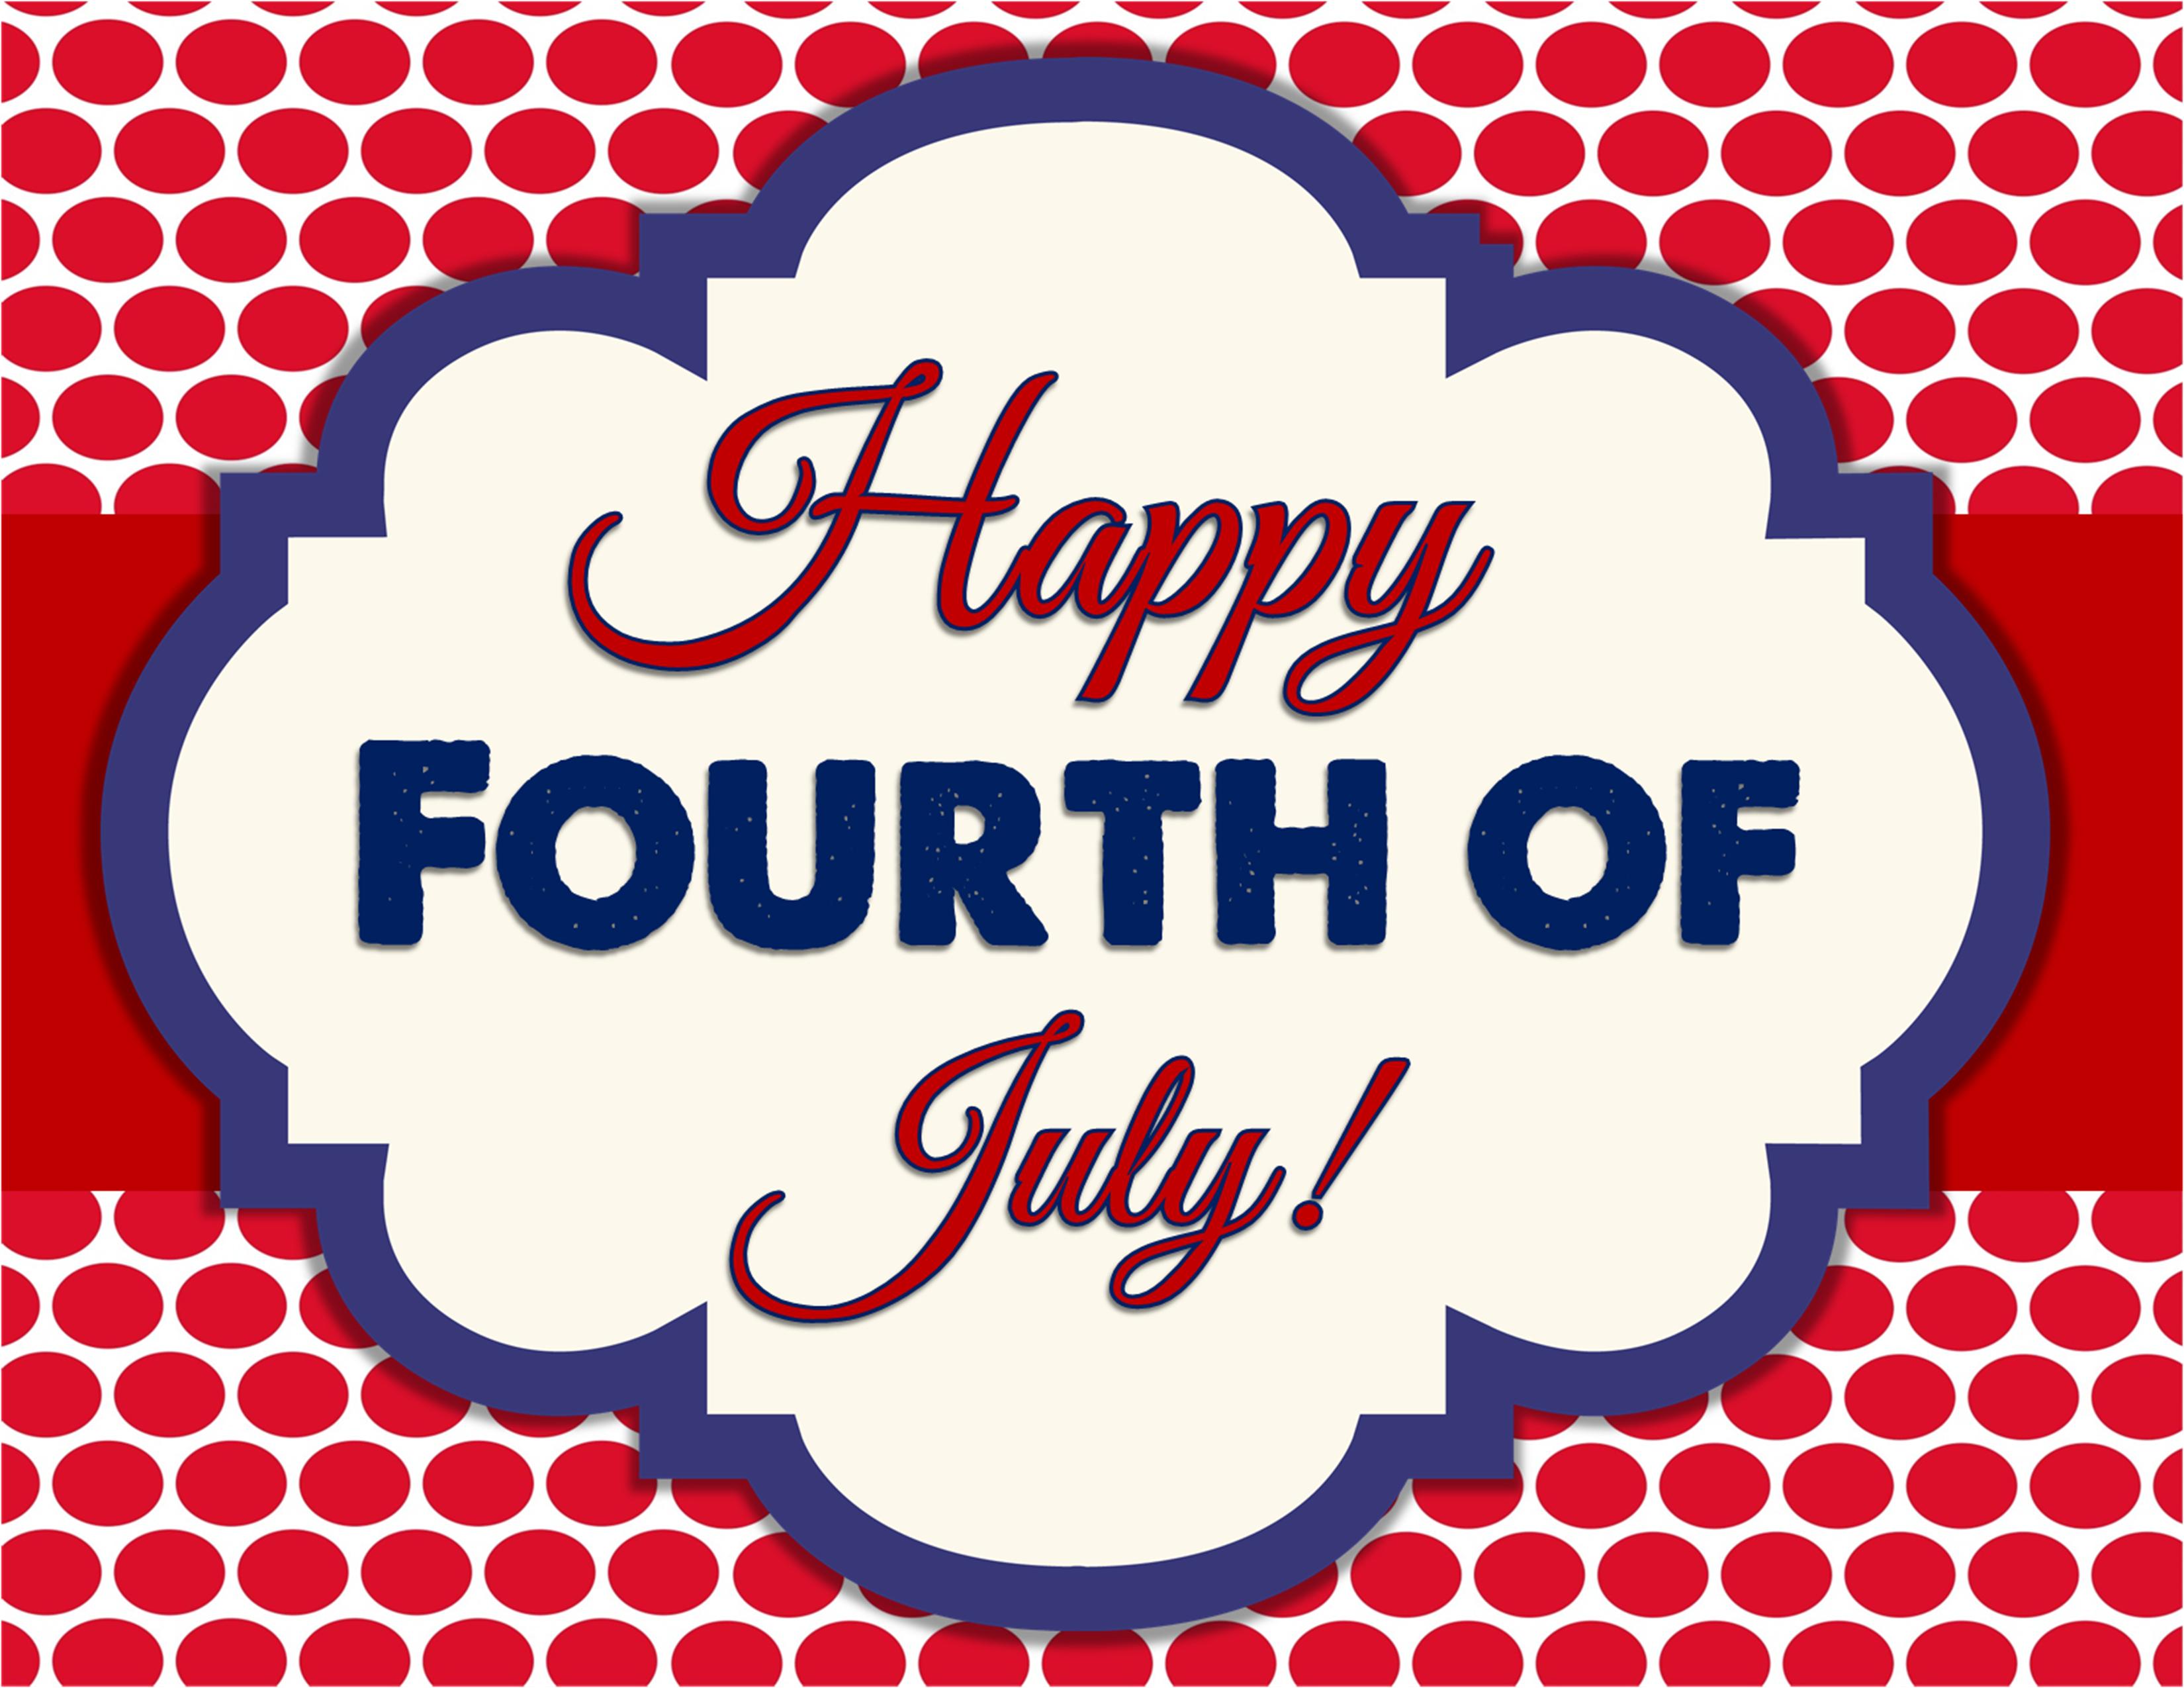 99+ Happy 4th of July Quotes, Images, Sayings, Fireworks ...